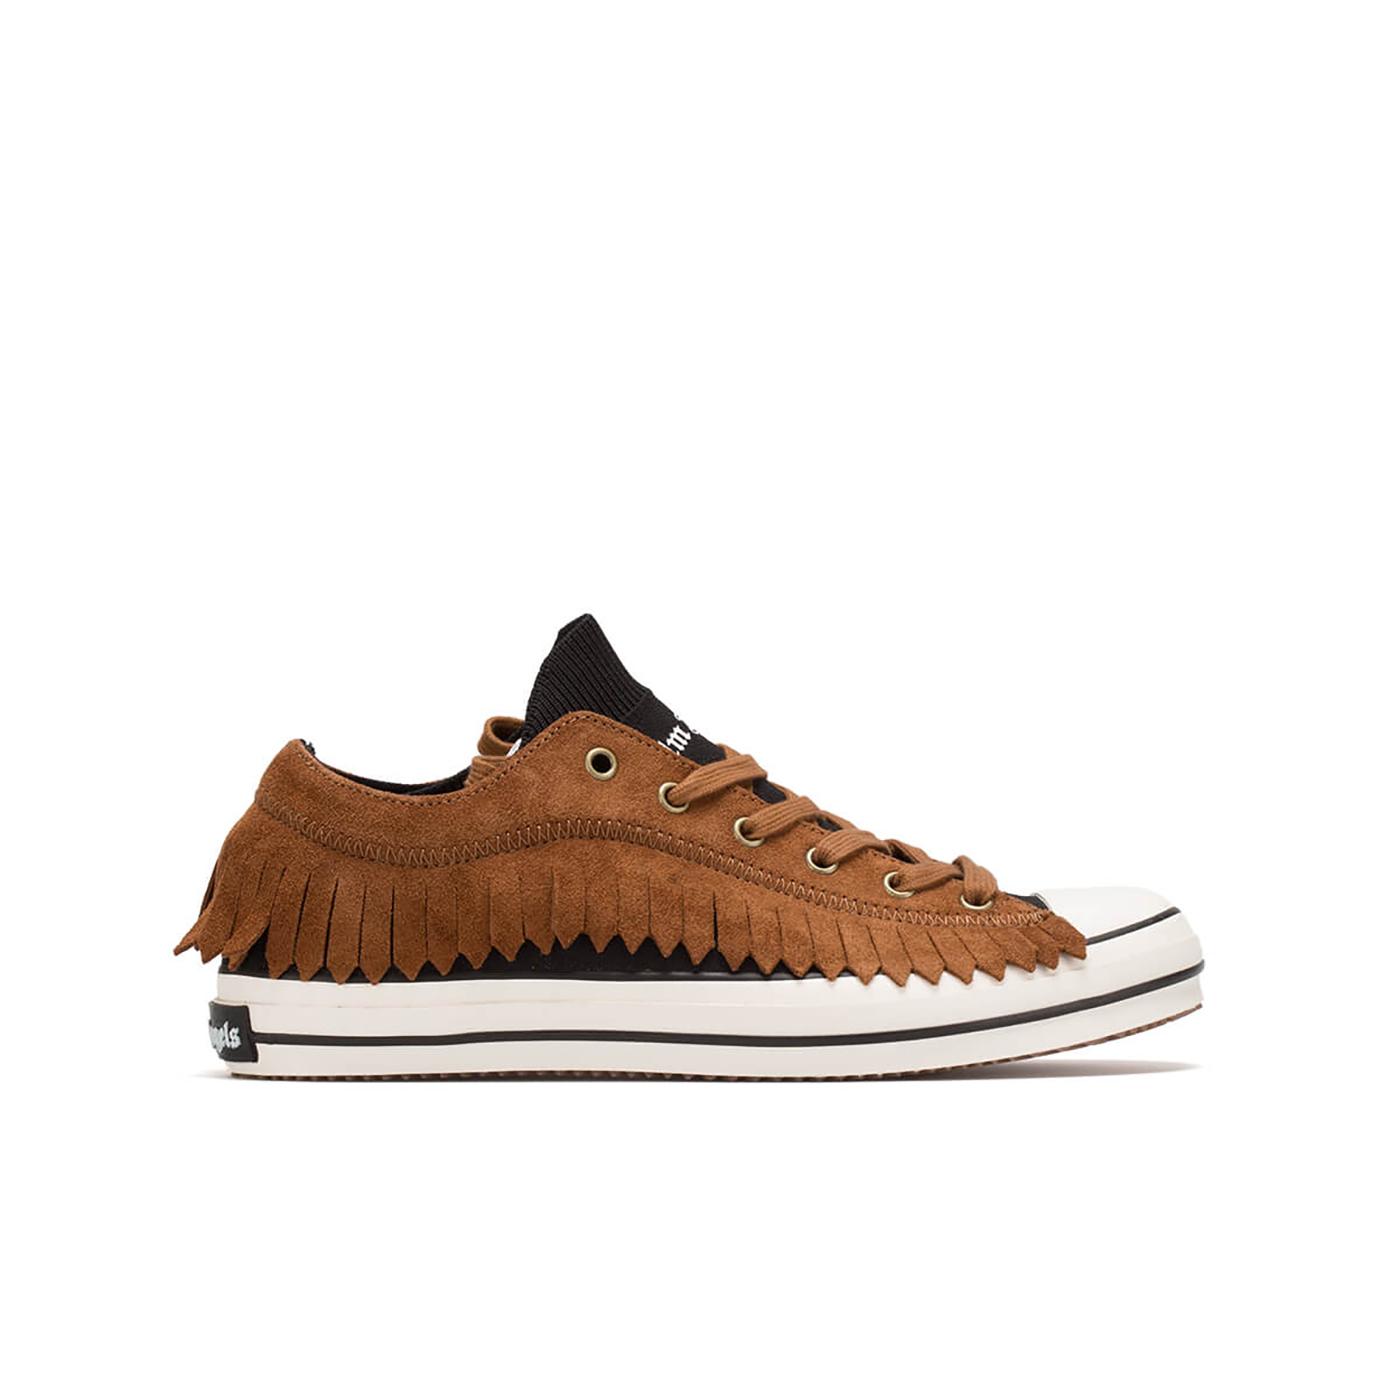 Palm Angels Synthetic Fringe Low Vulcanized Sneakers in Brown for Men - Lyst